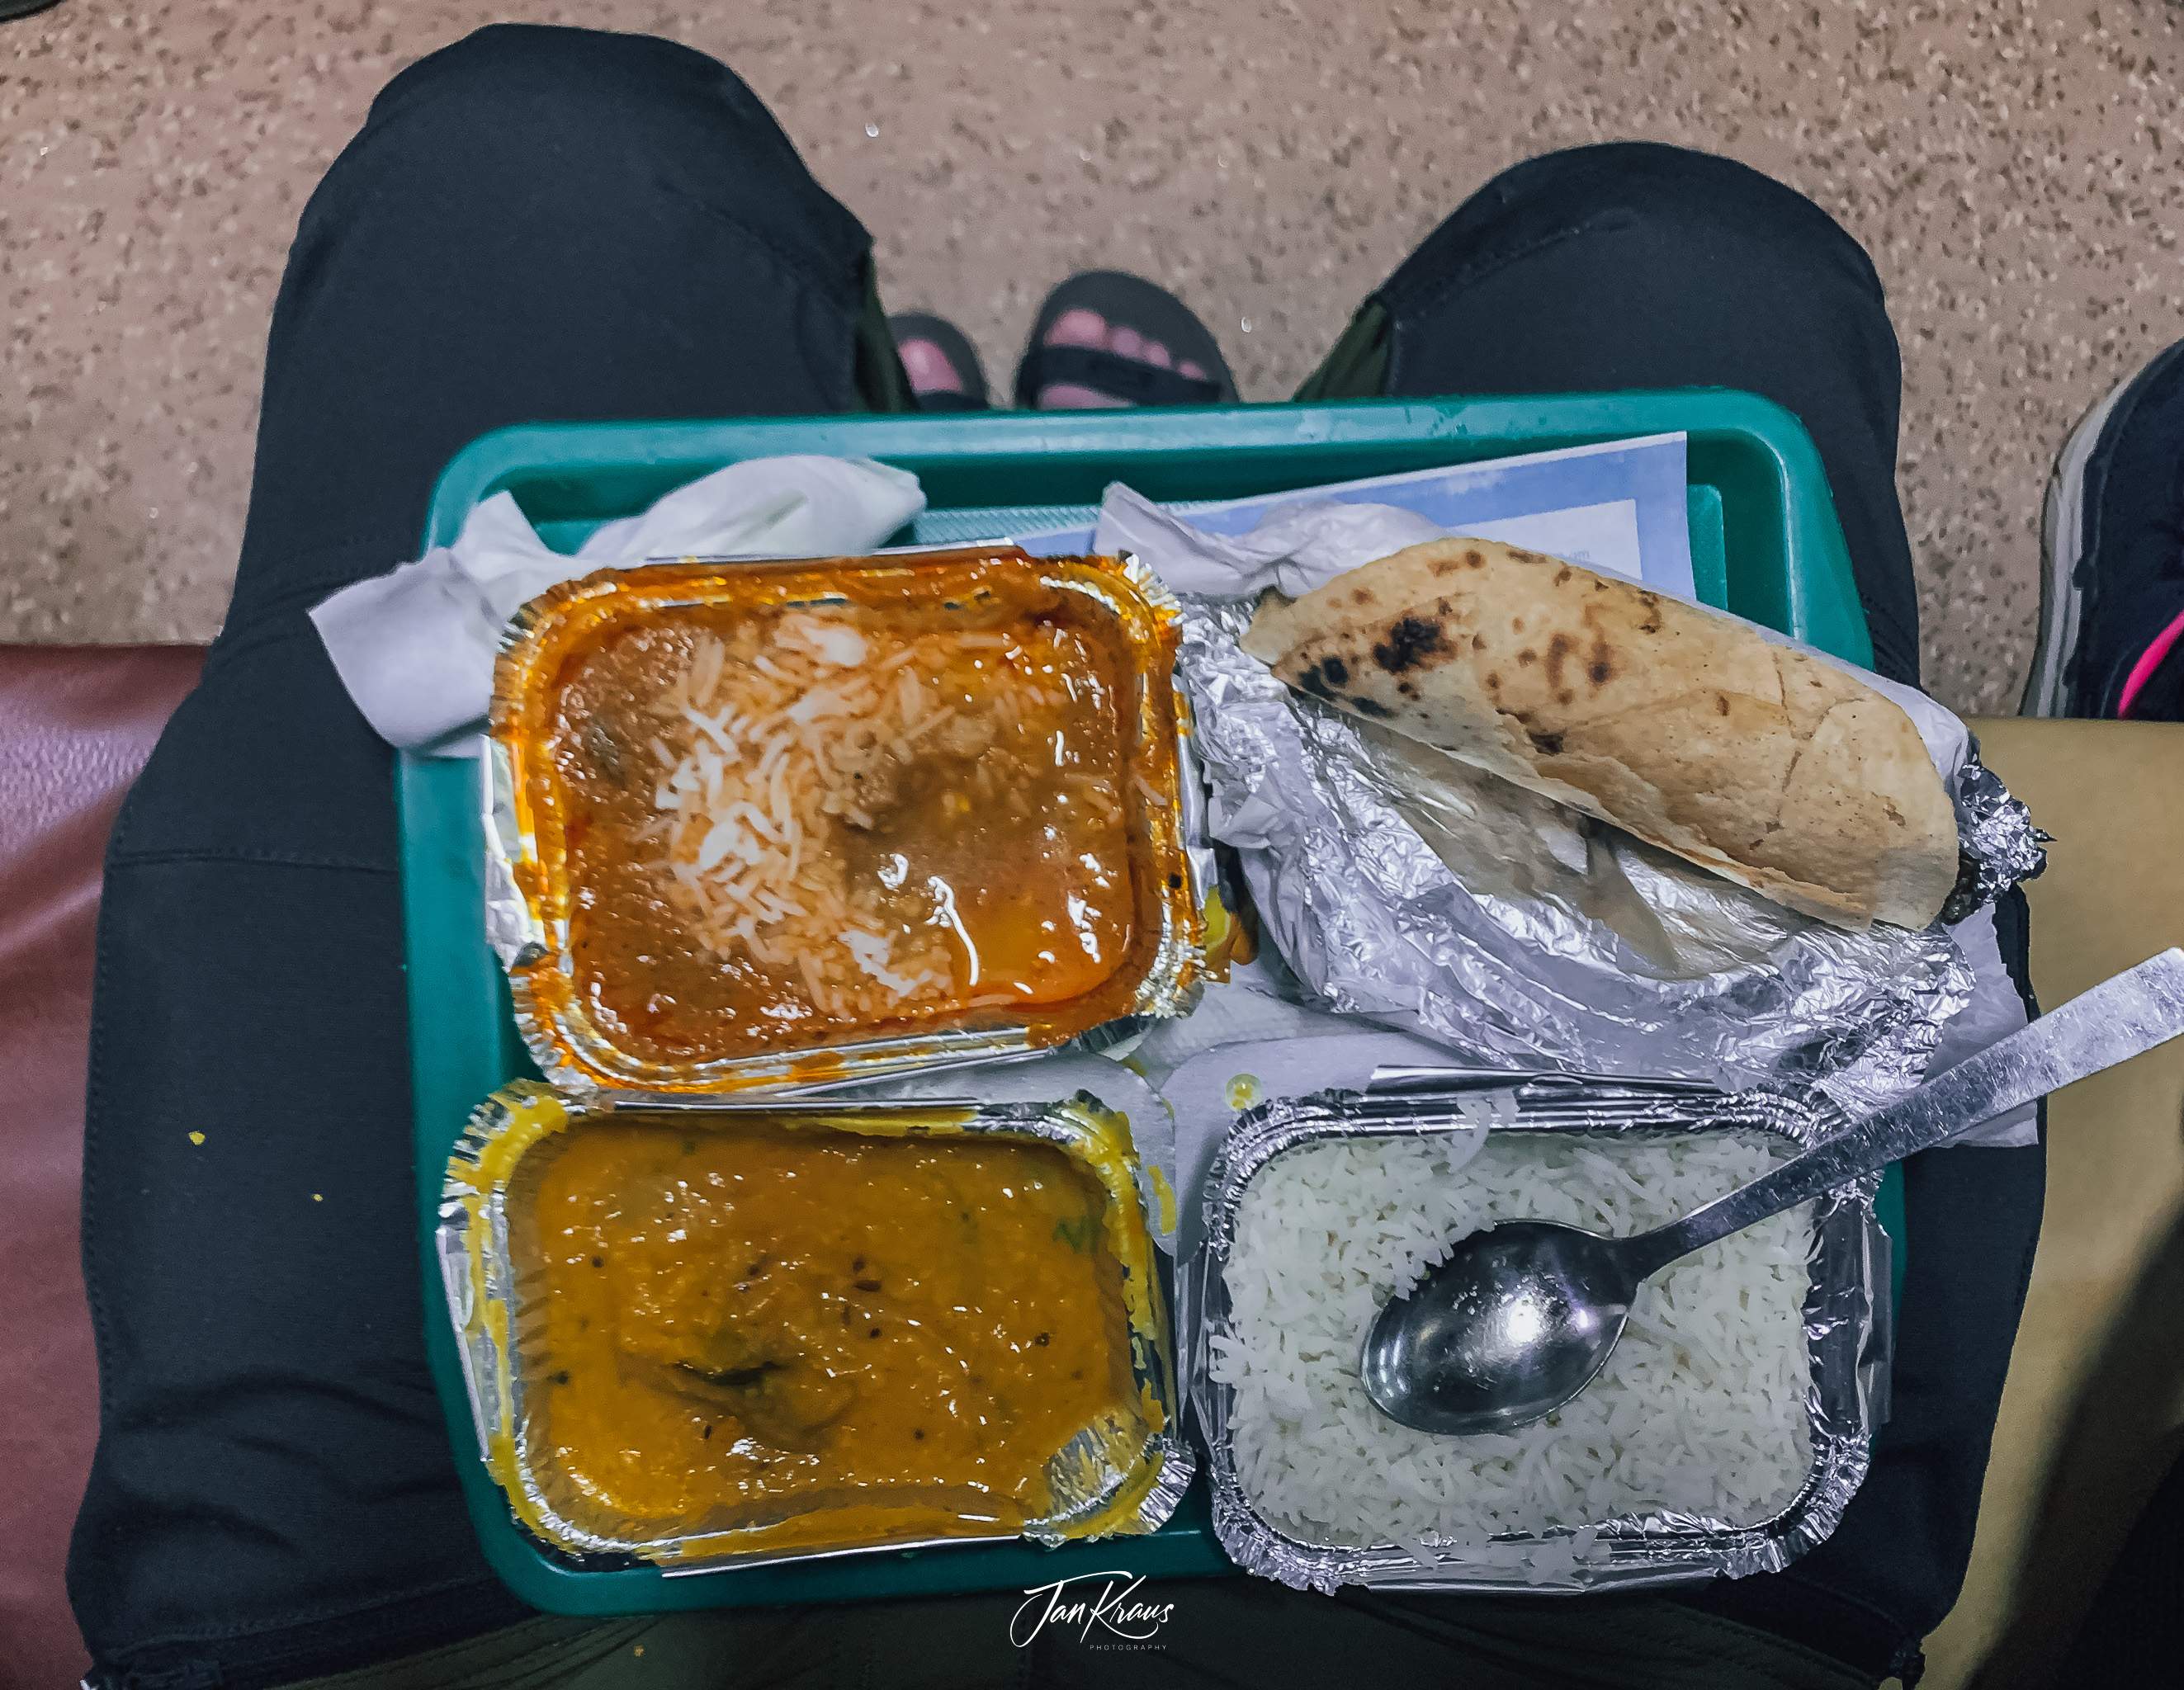 Evening meal served on the overnight train from Mumbai do Delhi, India